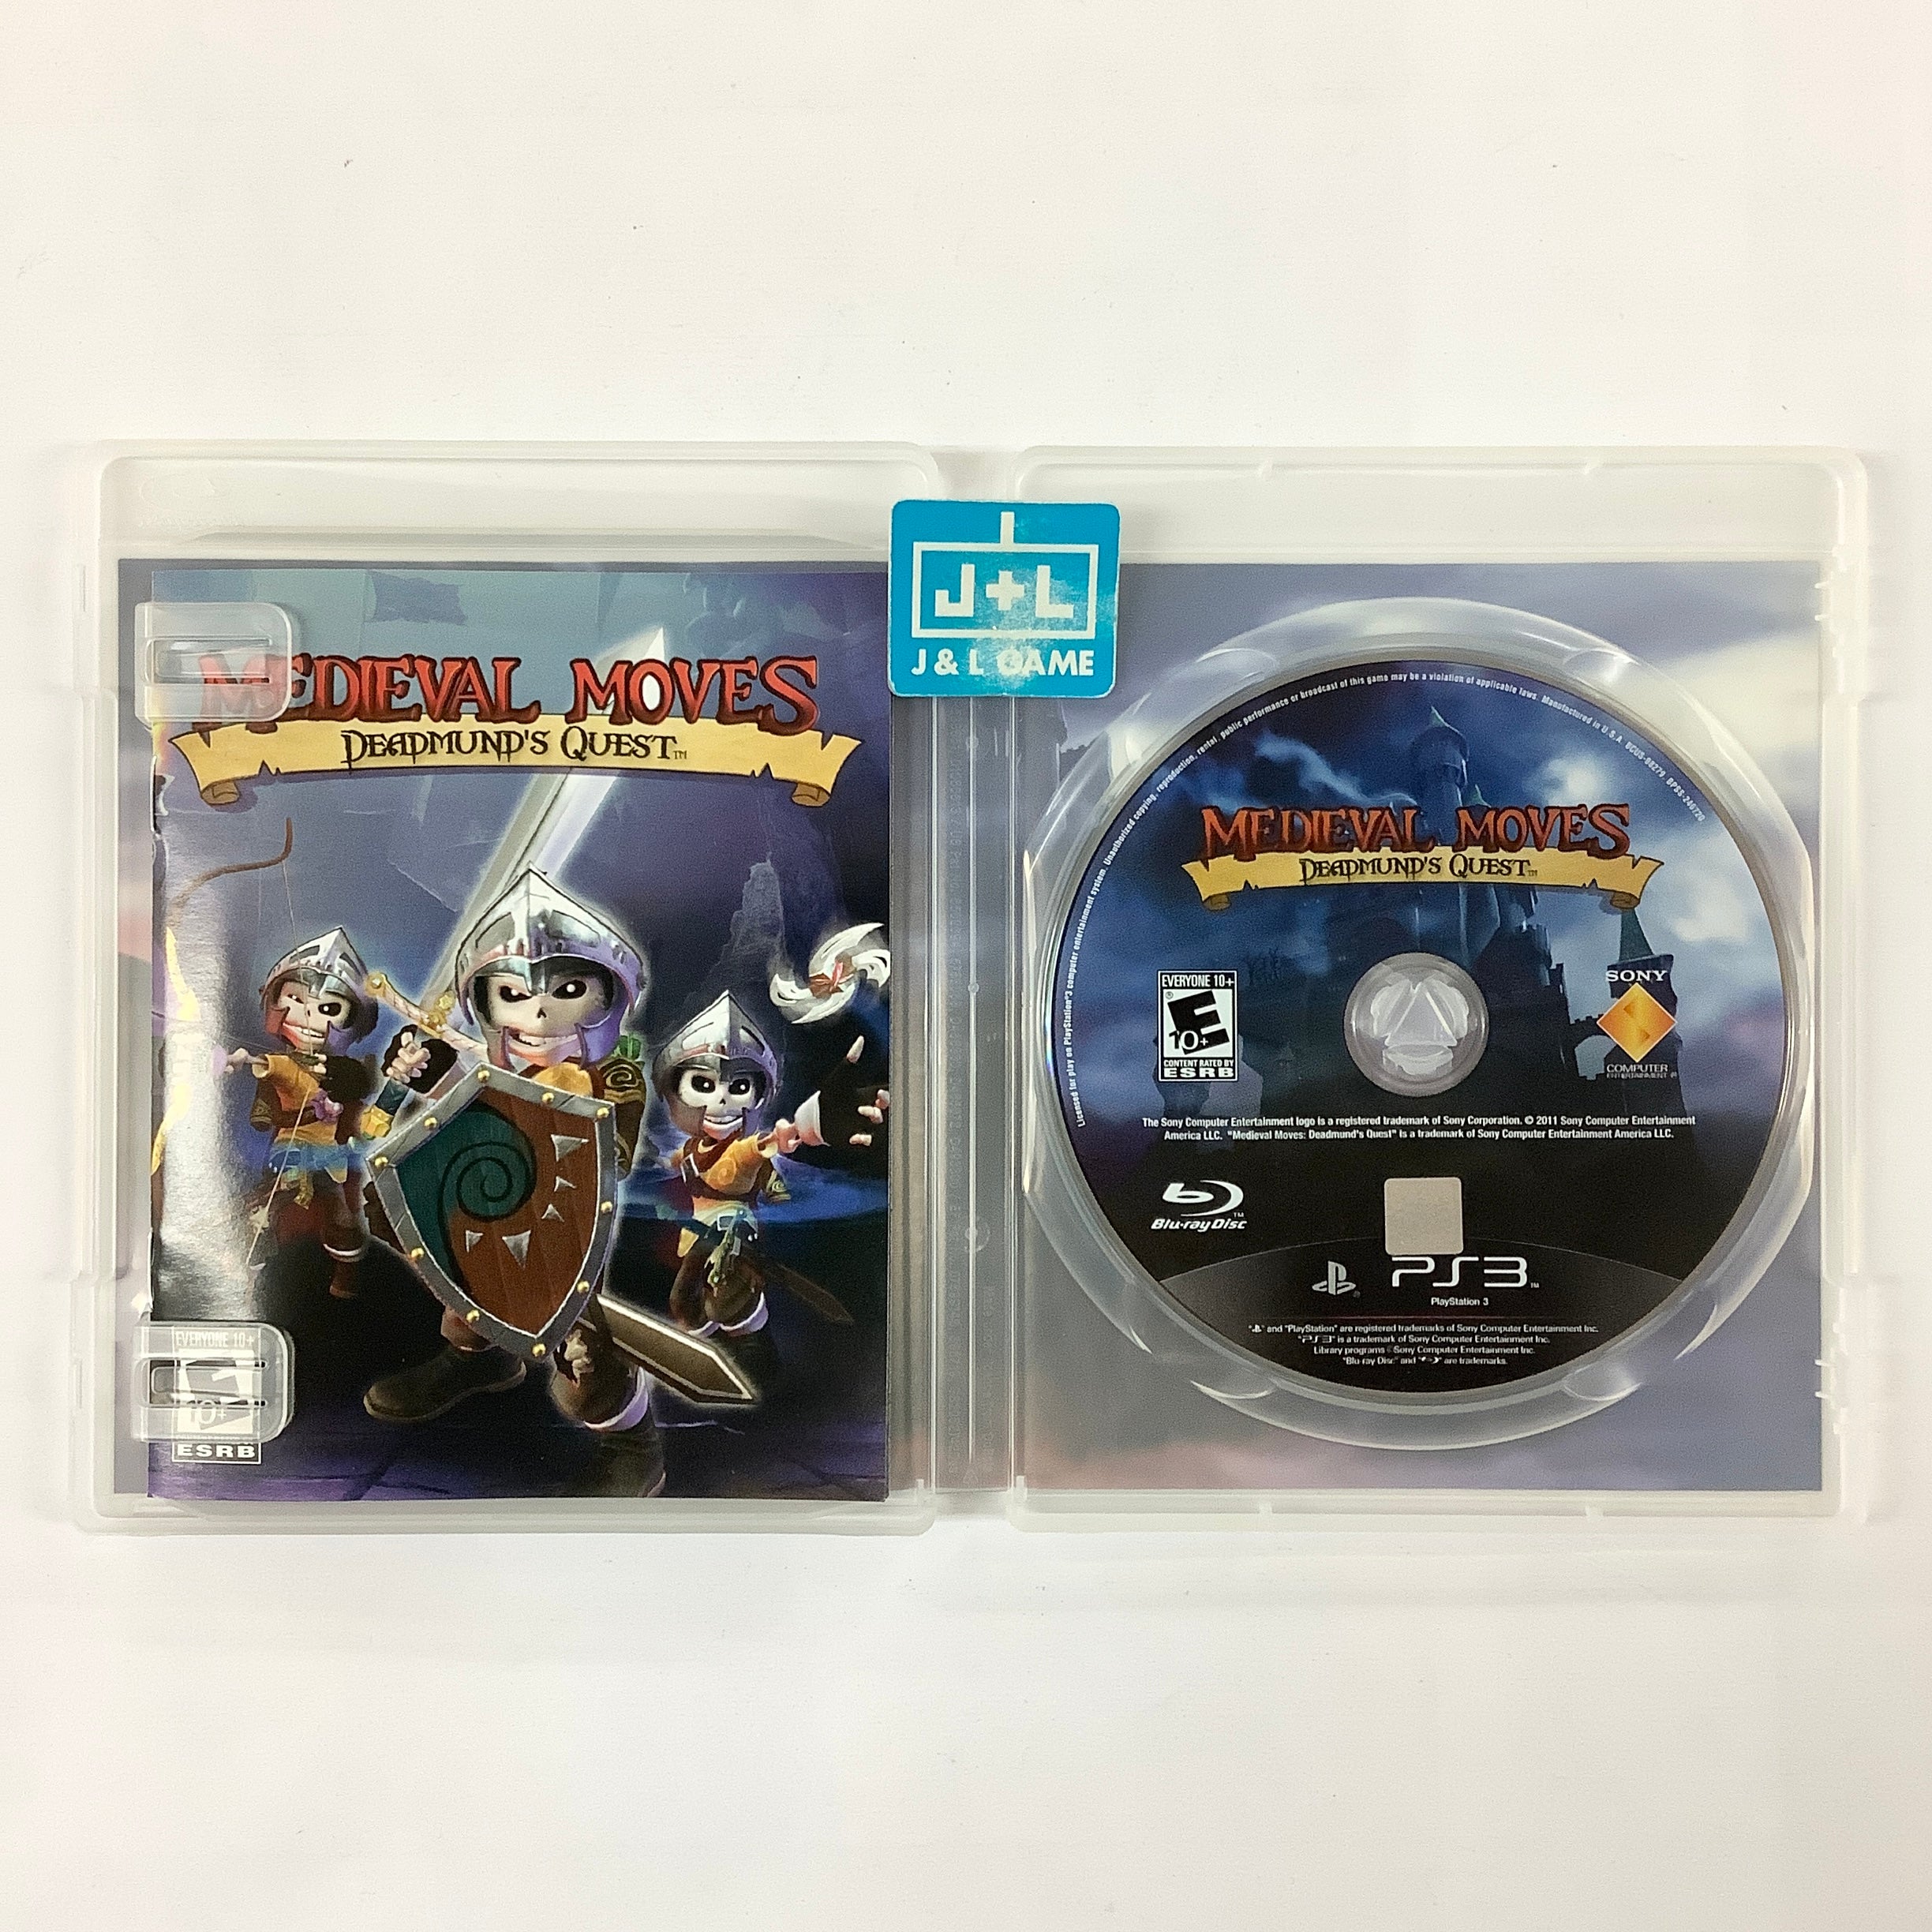 Medieval Moves: Deadmund's Quest (PlayStation Move Required) - (PS3) Playstation 3 [Pre-Owned] Video Games SCEA   